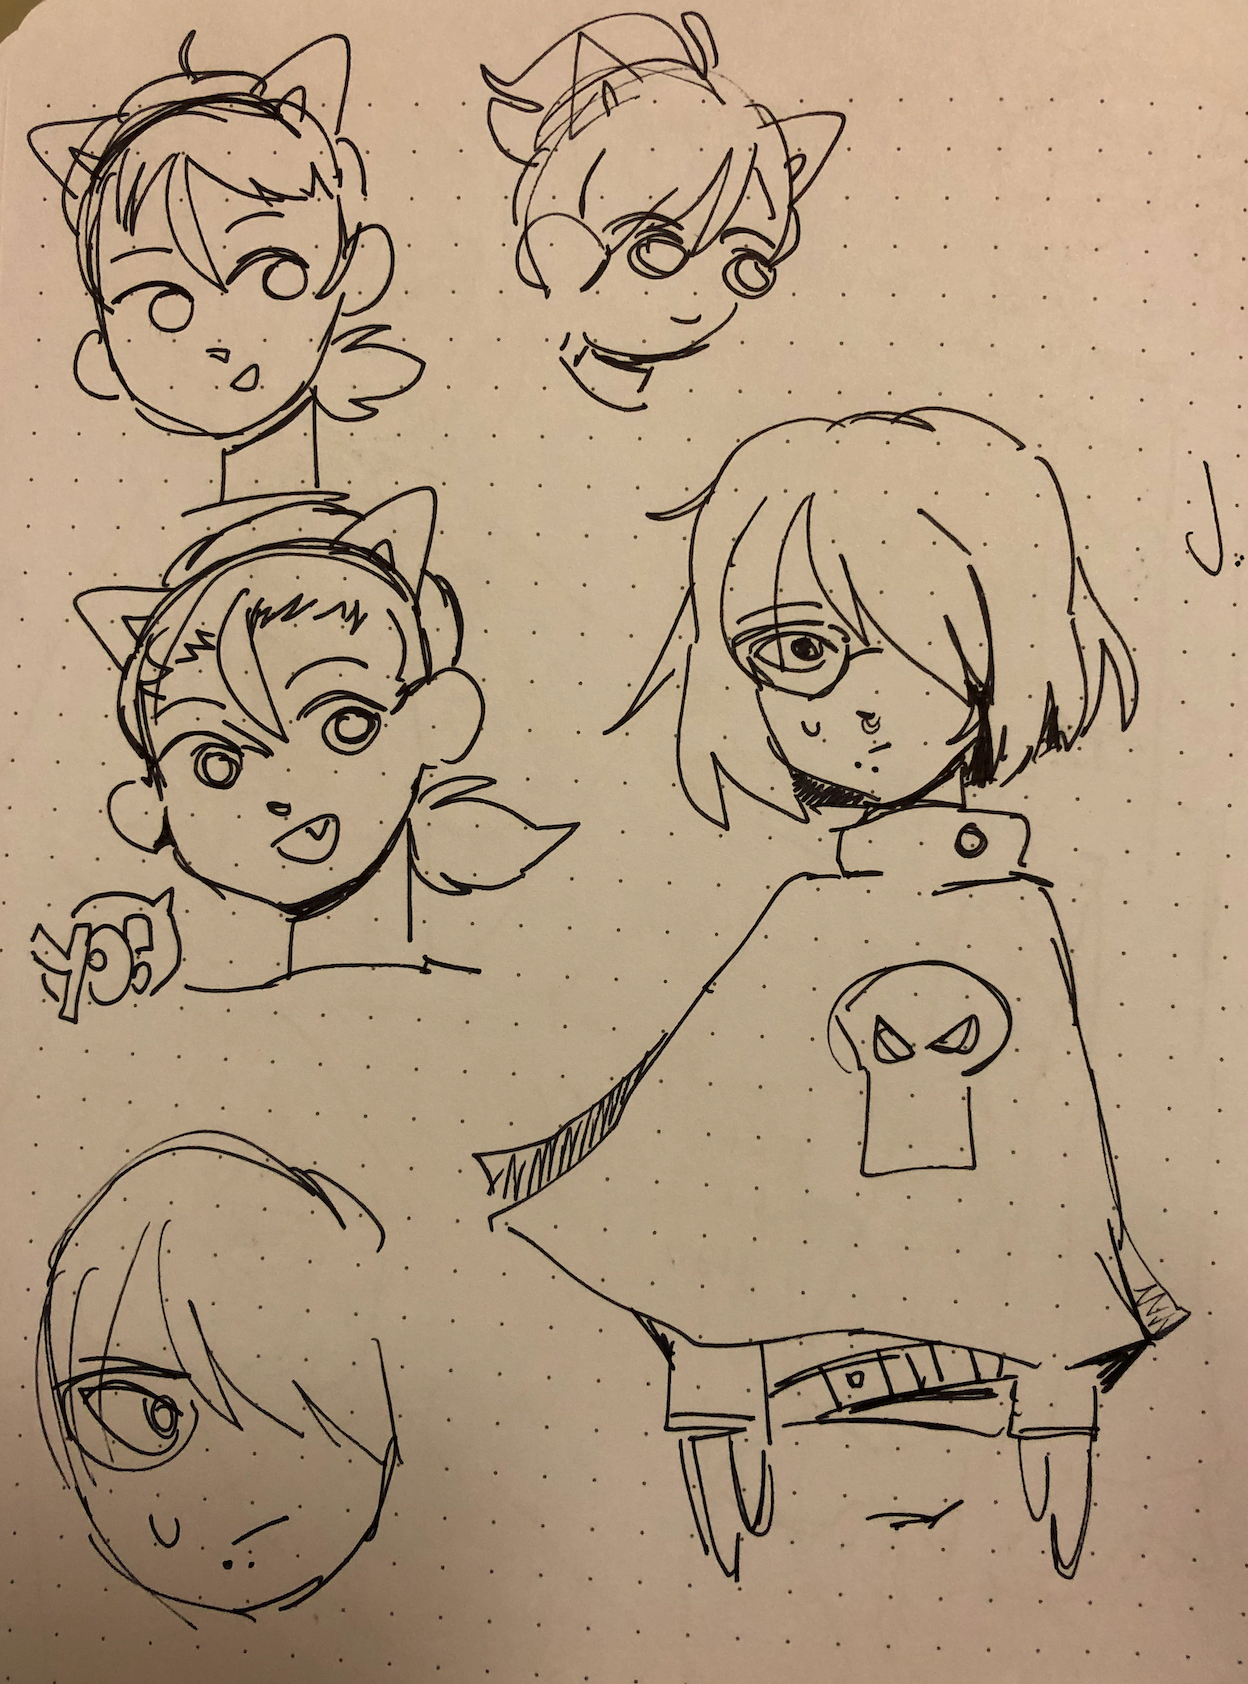 These are sketches to plan out the characters in McCanney Middle School Anime Club. This image shows initial plans for Caroline and Jasper. Caroline's bangs are pushed back by a headband with cat ears on them. Jasper is wearing a longer cape that reaches his waist.